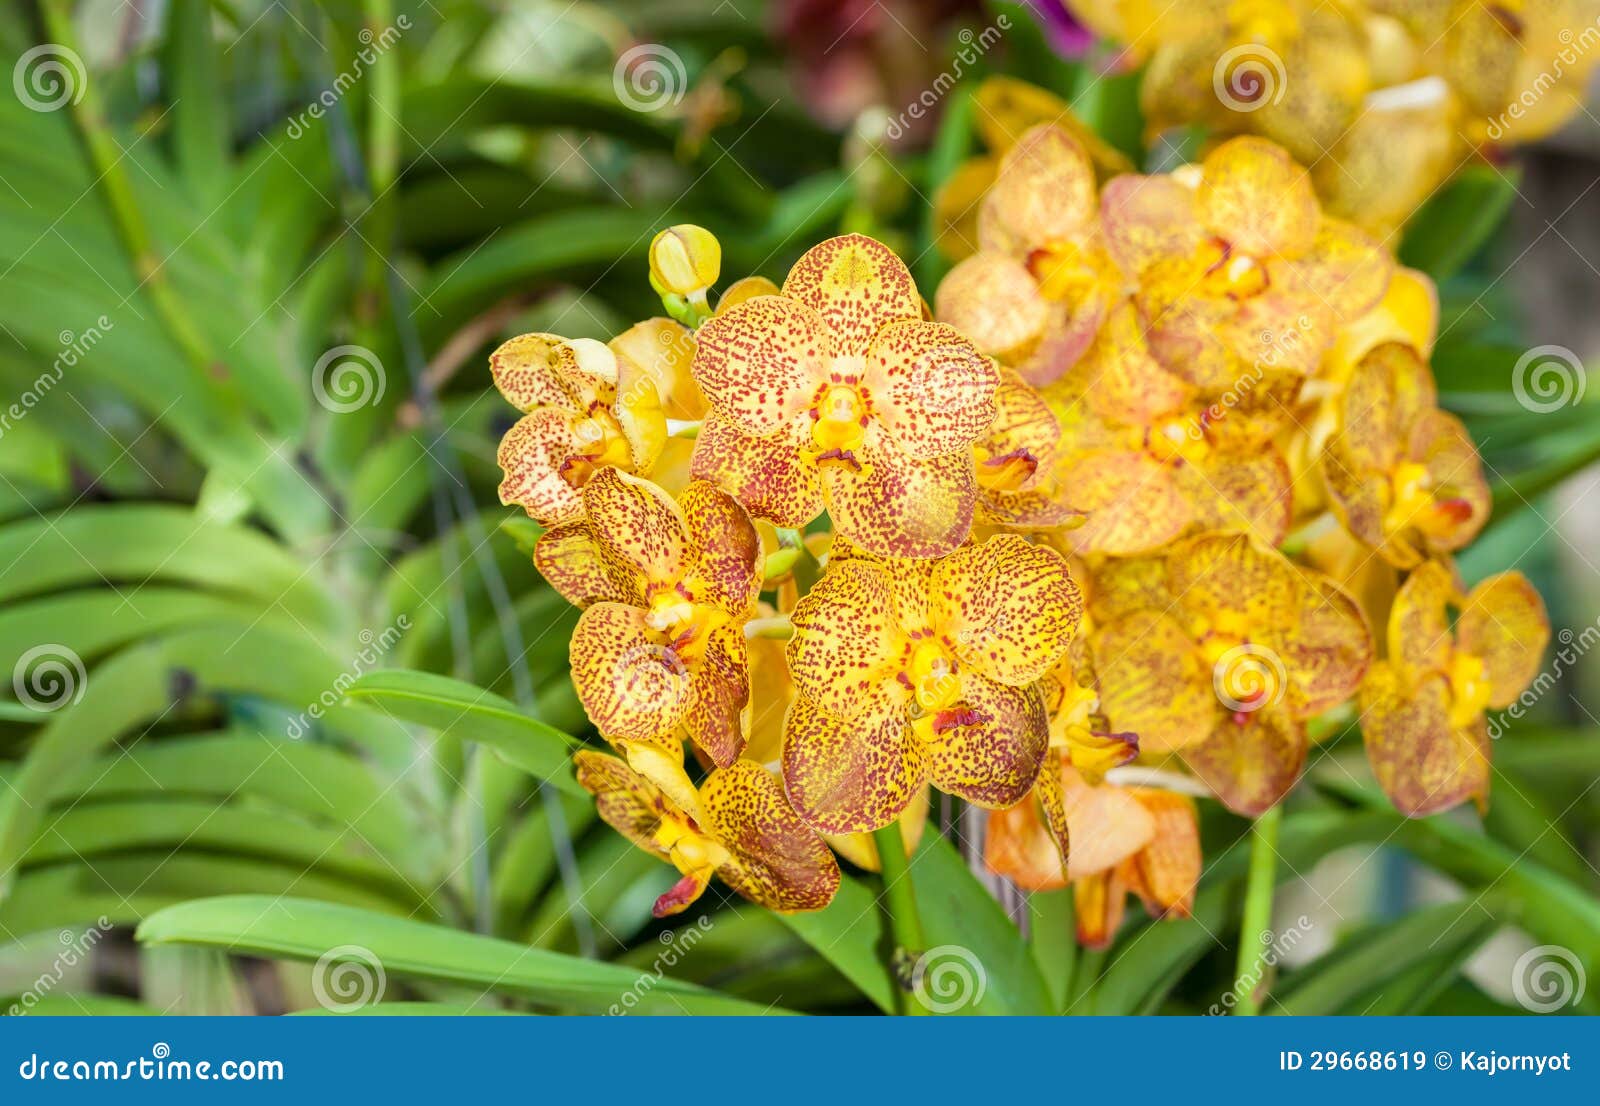 The Yellow Hybrid Vanda Orchid Stock Image - Image of dendrobium, colorful:  29668619